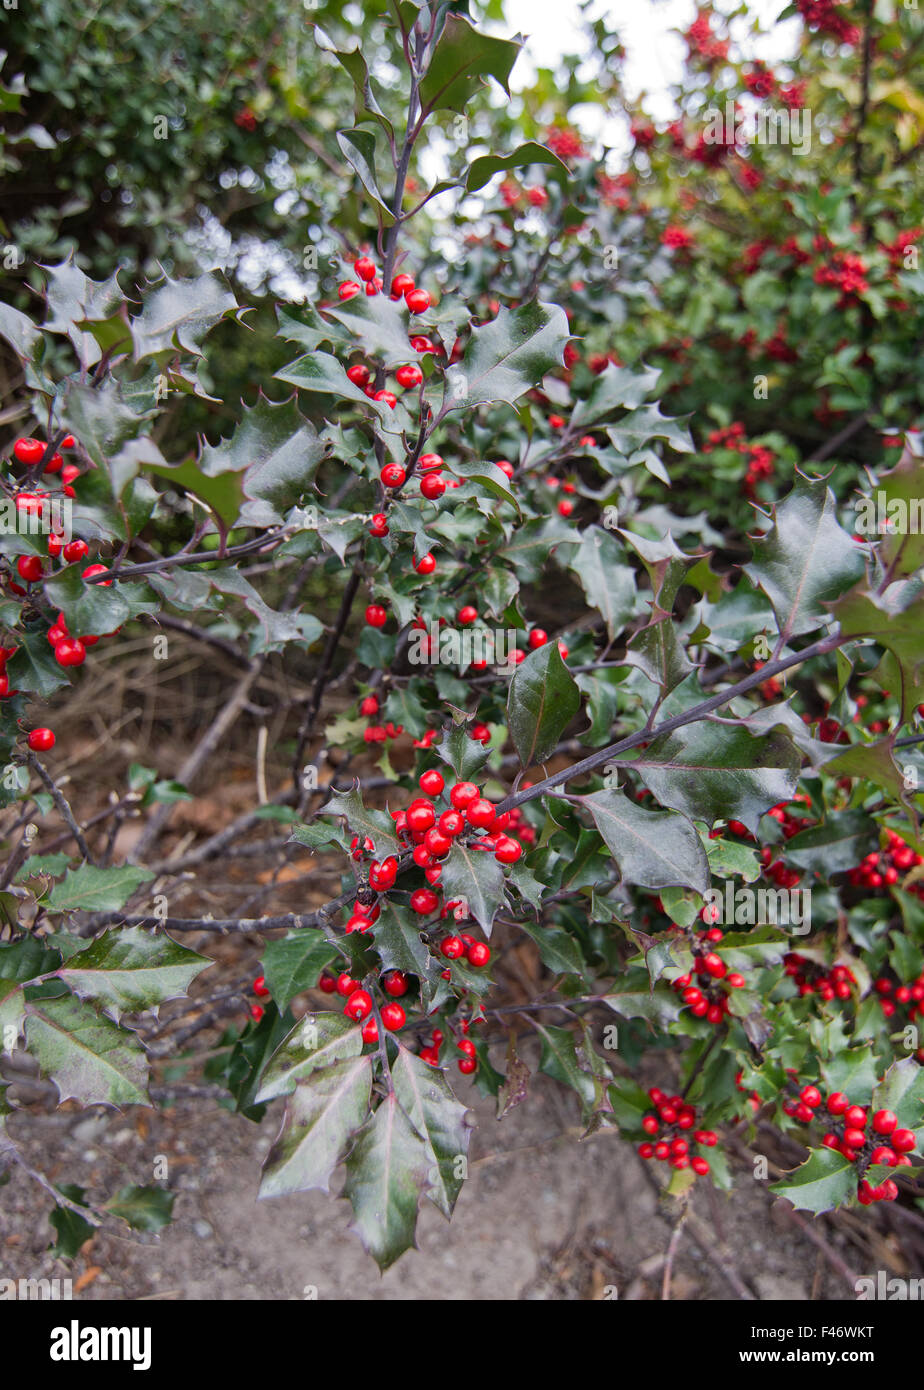 Holly bush Ilex meserveae with prickly leaves and red berries Stockholm, Sweden in October. Stock Photo